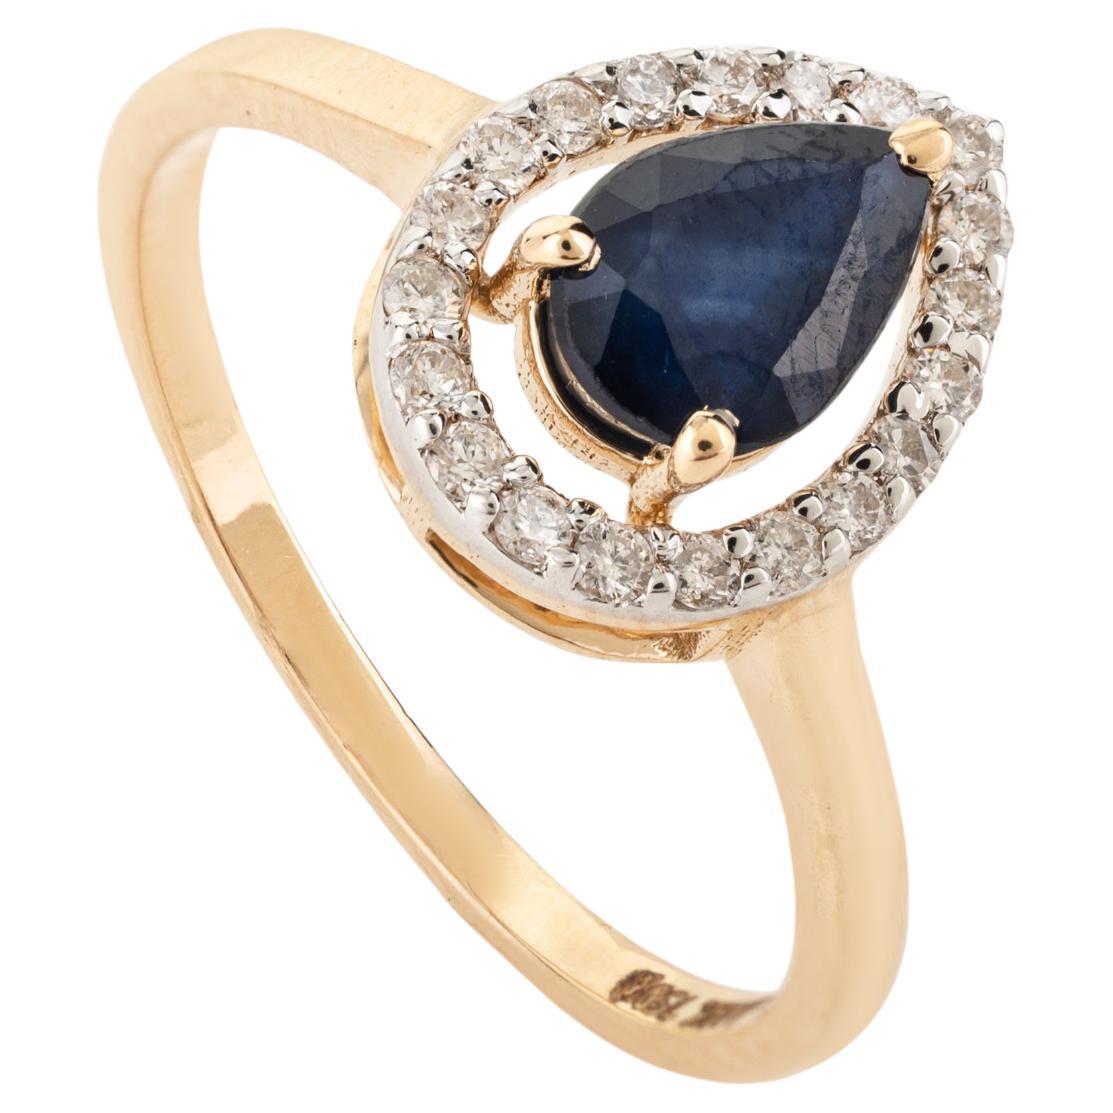 For Sale:  Pear Blue Sapphire Round Diamond Halo Engagement Ring Gift in 18k Yellow Gold